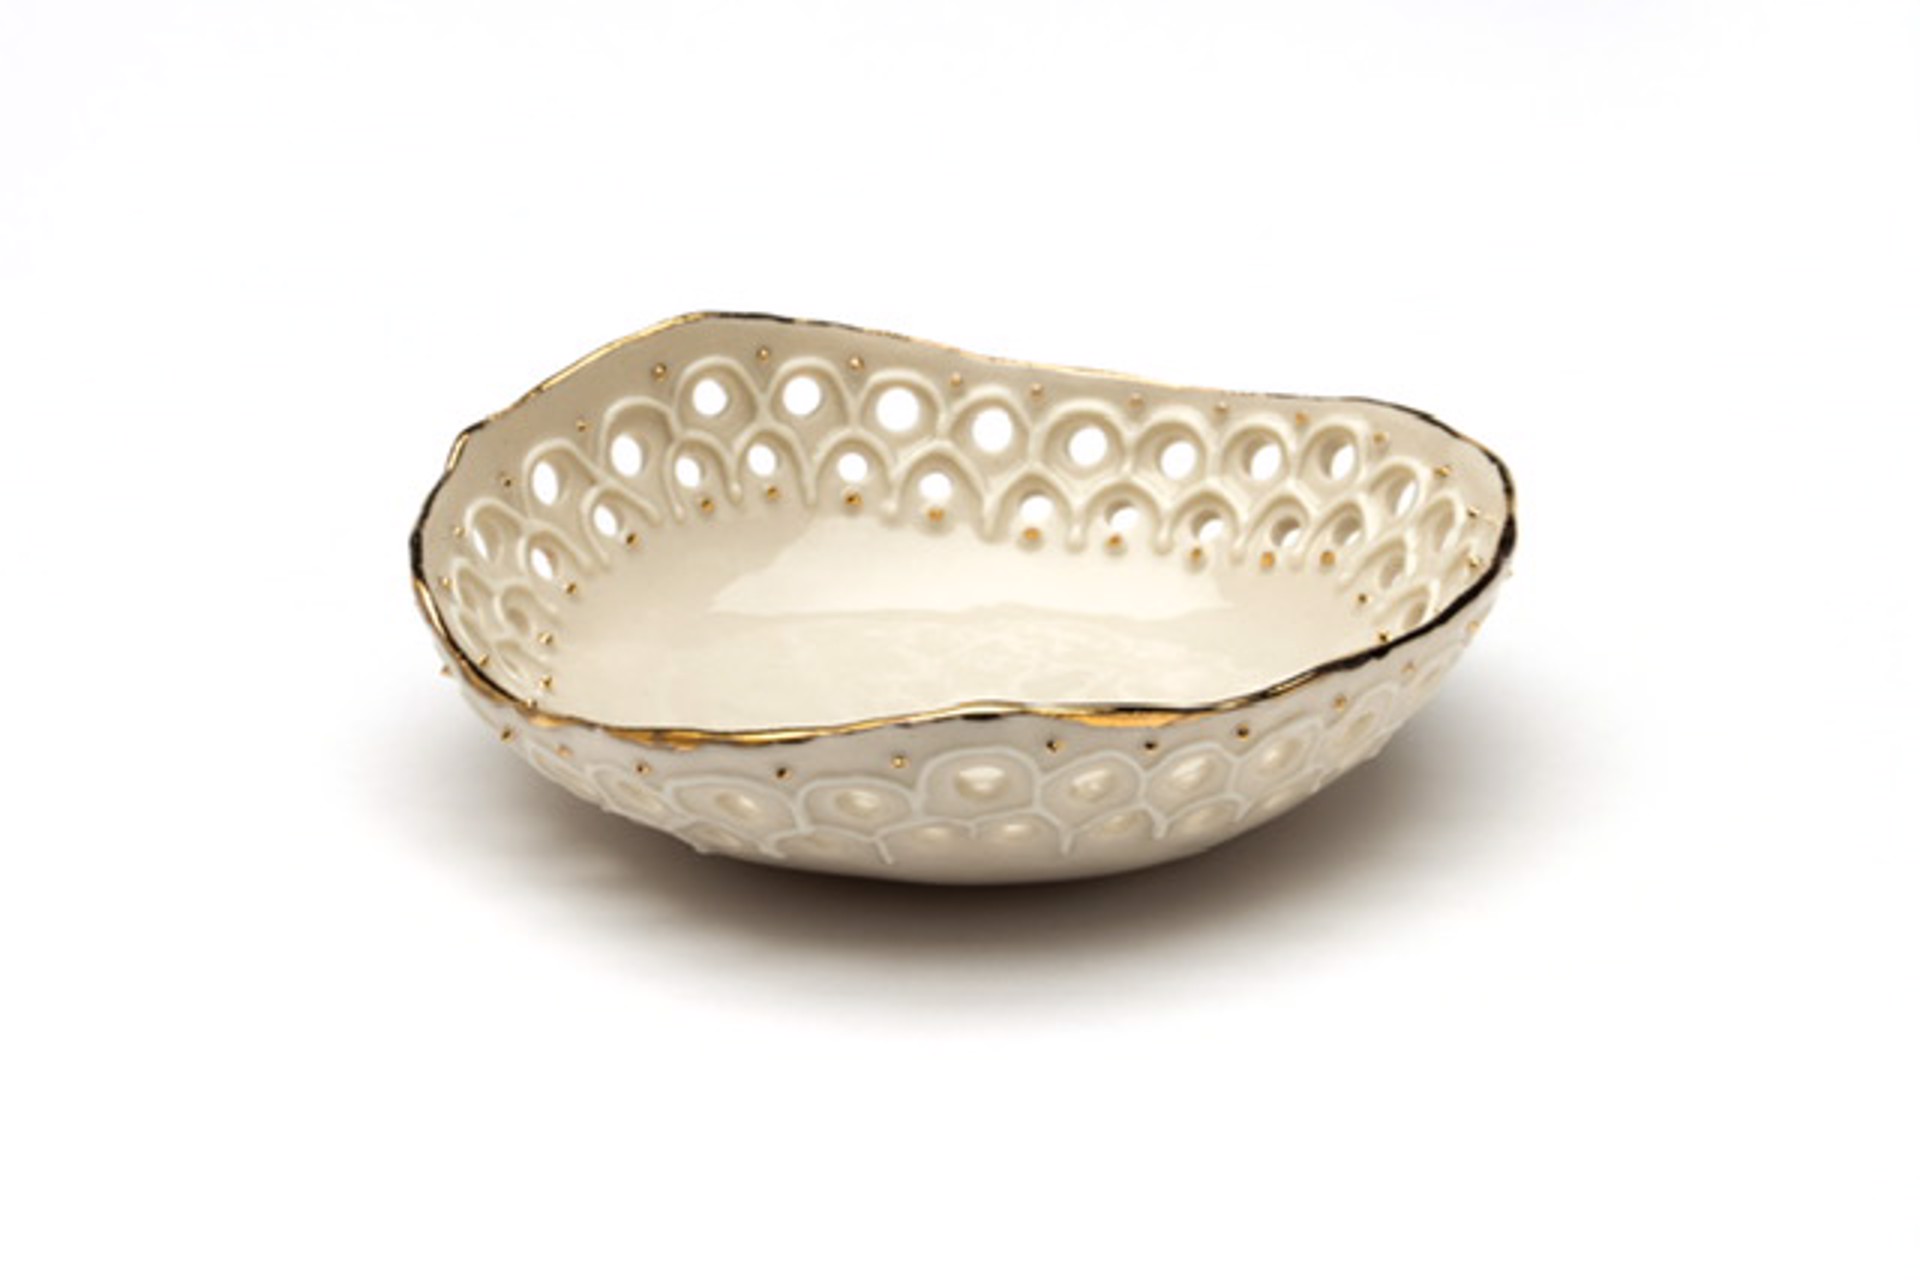 Small White & Gold Lacy Bowl by Maria Bruckman